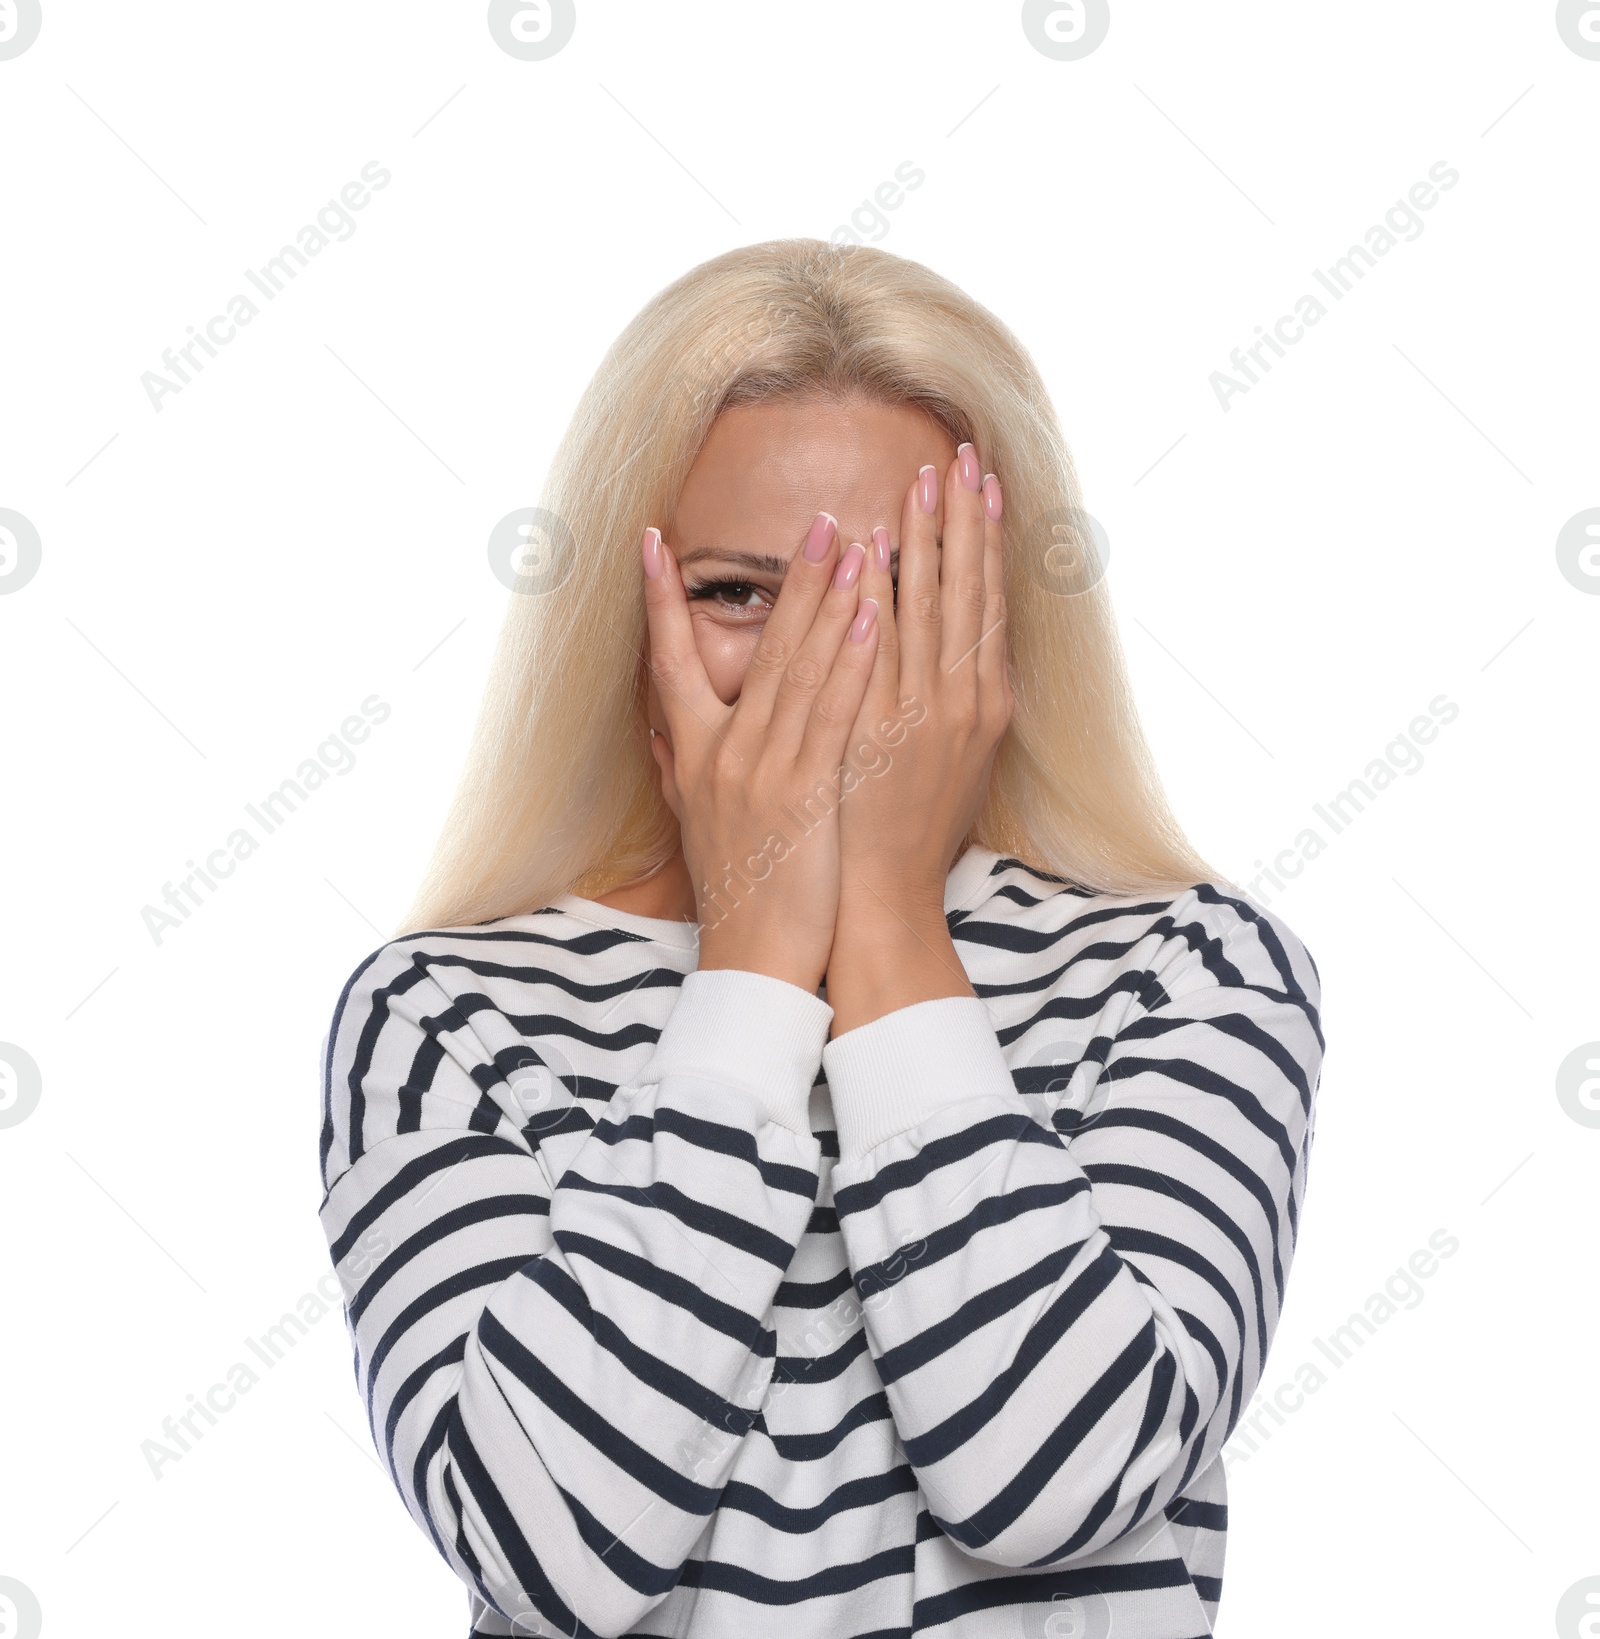 Photo of Embarrassed woman covering face with hands on white background